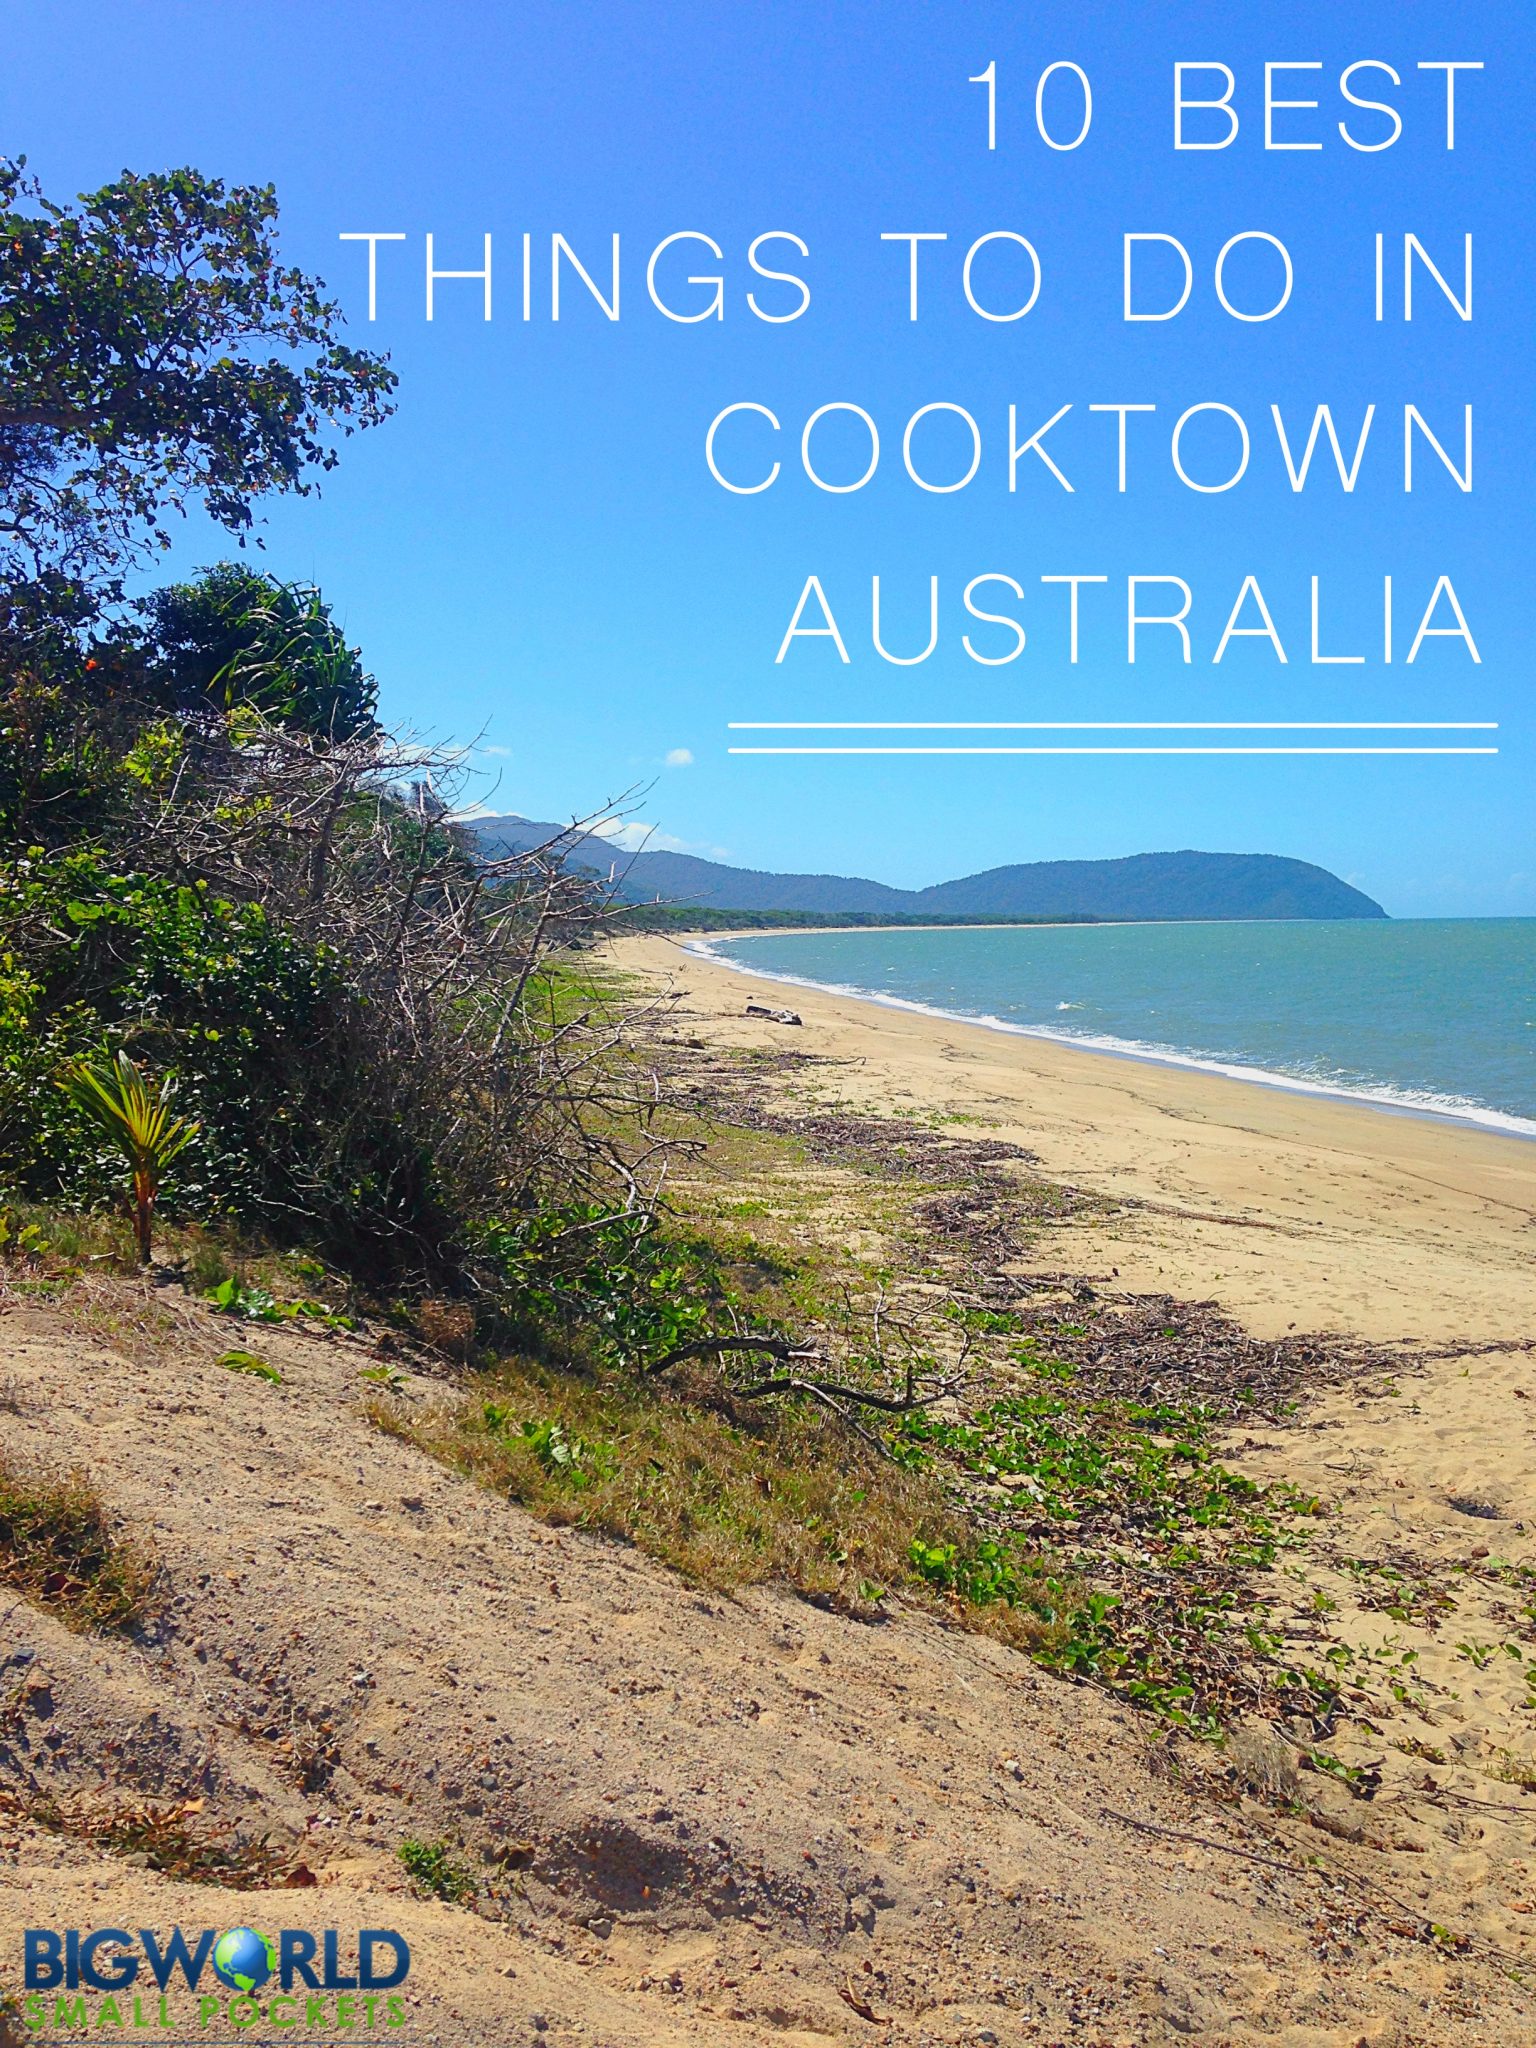 10 Best Things to do in Cooktown, Australia {Big World Small Pockets}